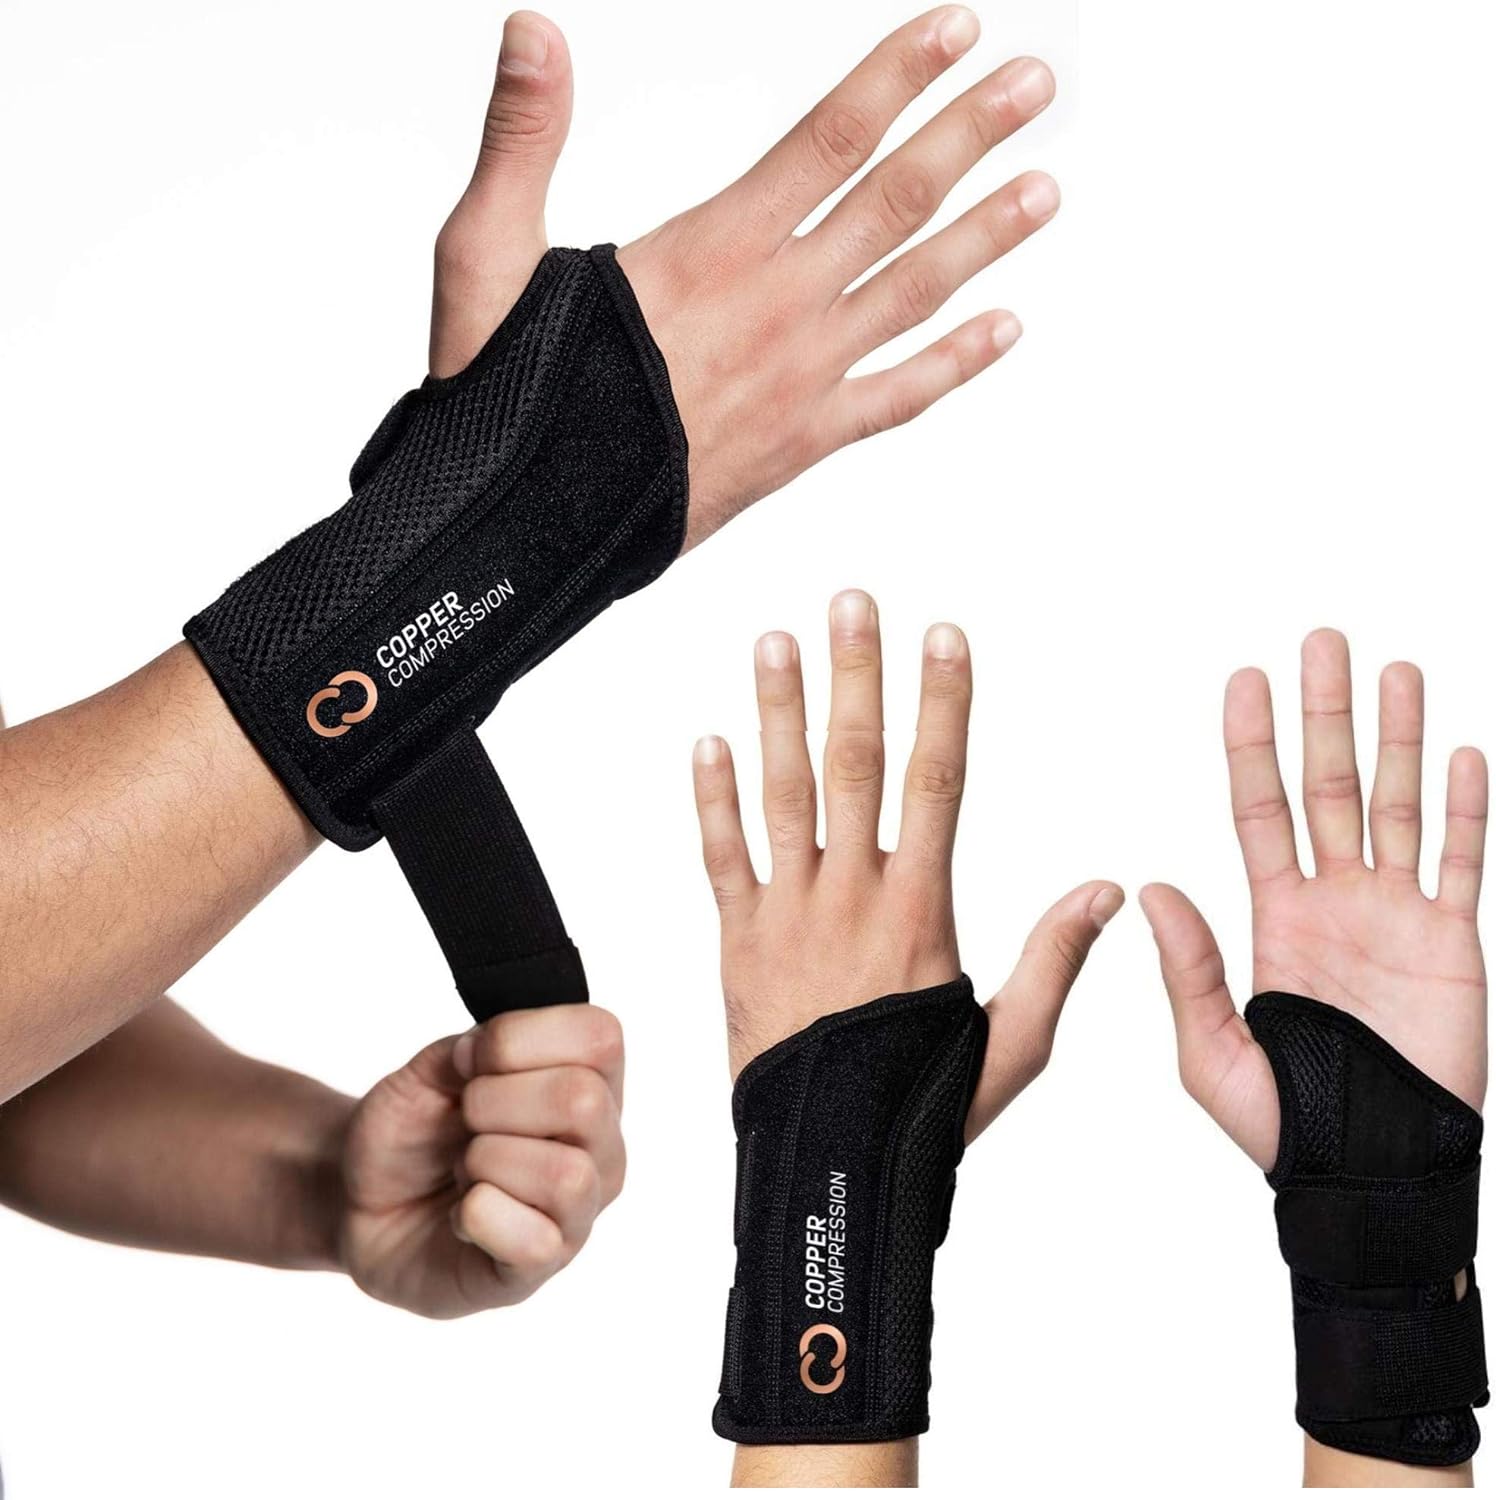 Copper Compression Wrist Brace - Copper Infused Adjustable Orthopedic Support Splint for Pain, Ganglion Cyst, Carpal Tunnel, Arthritis, Tendinitis for Men Women Fits Left Hand L-XL